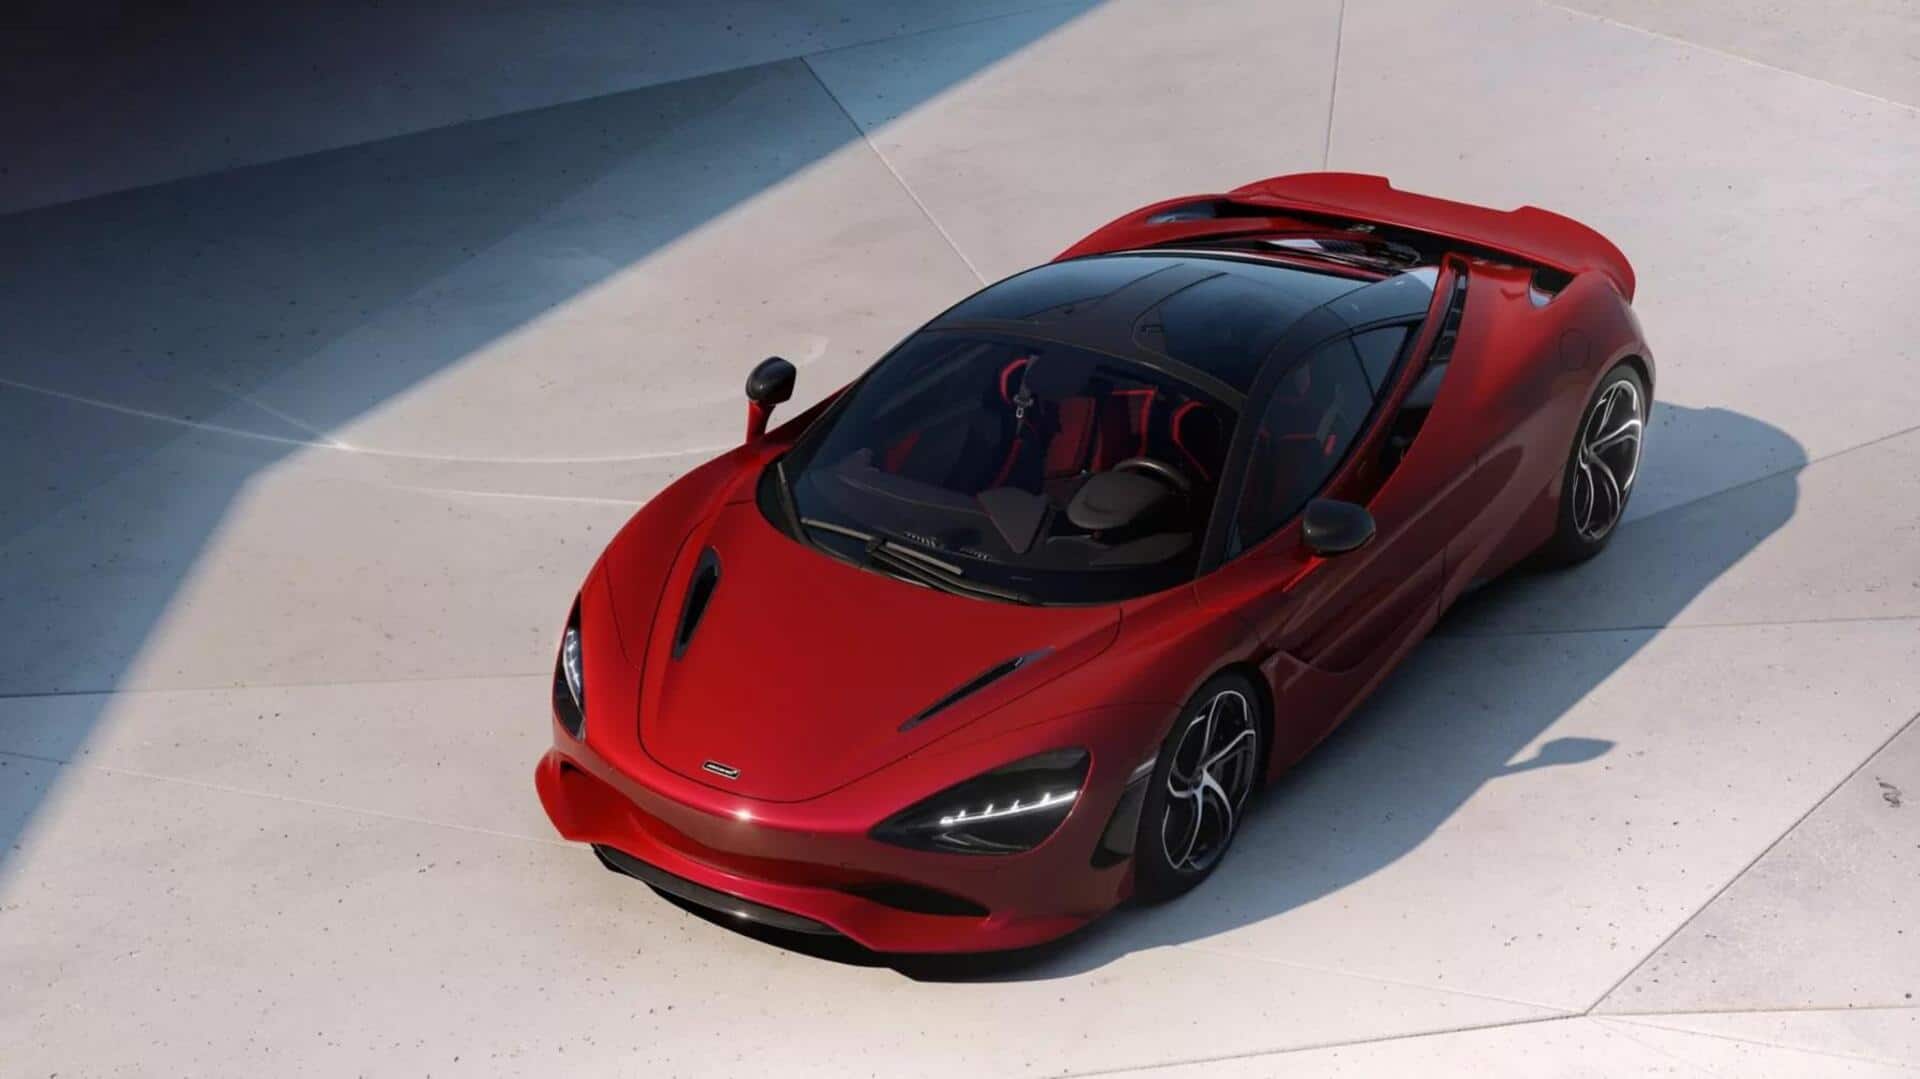 McLaren to launch its most powerful car in India tomorrow